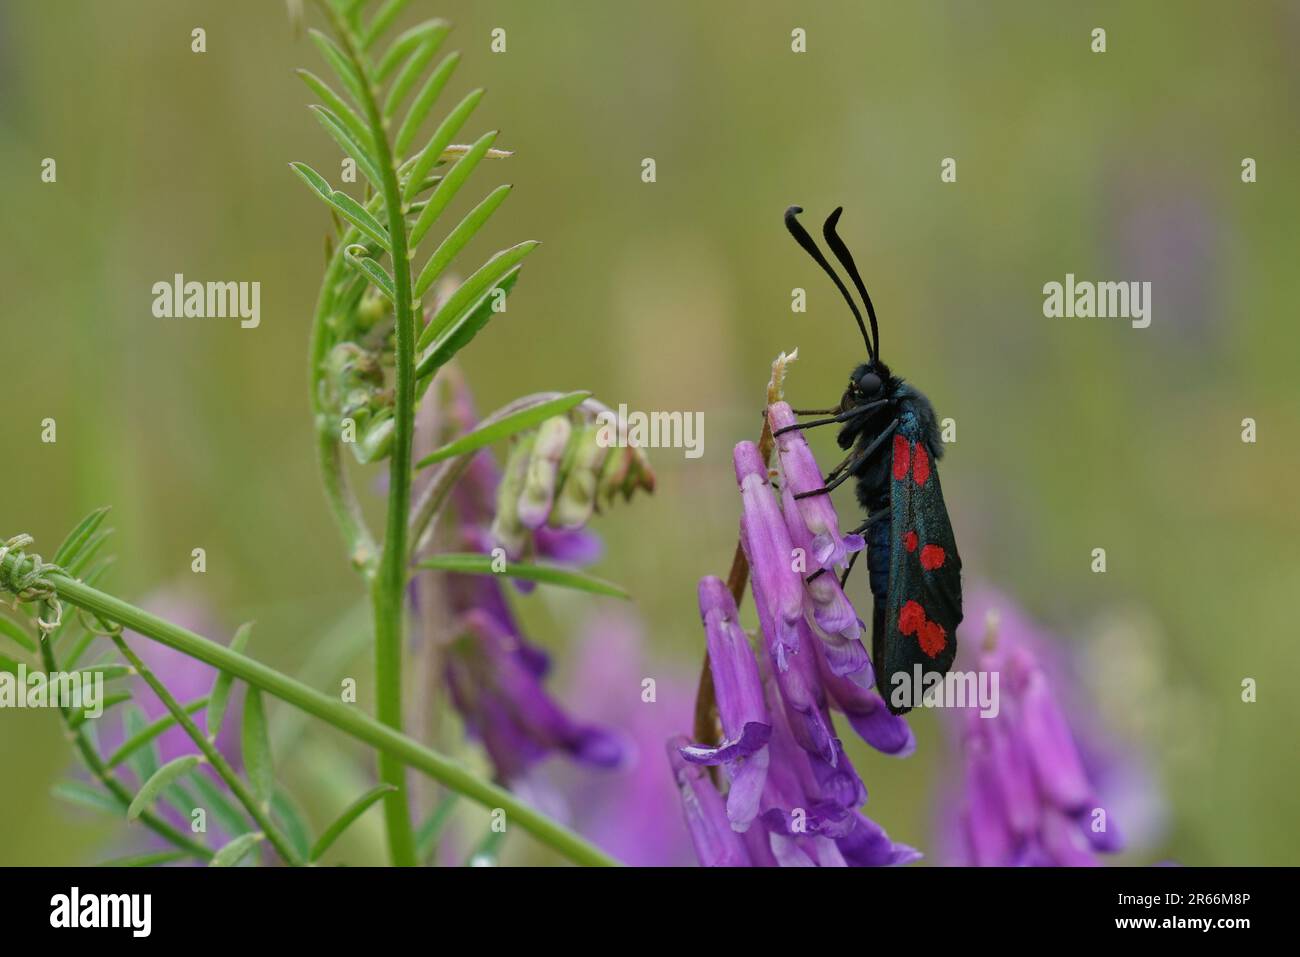 Natural closeup on the colorful and diurnal Narrow-bordered Five-spot Burnet moth , Zygaena lonicerae on purple Vetch Stock Photo